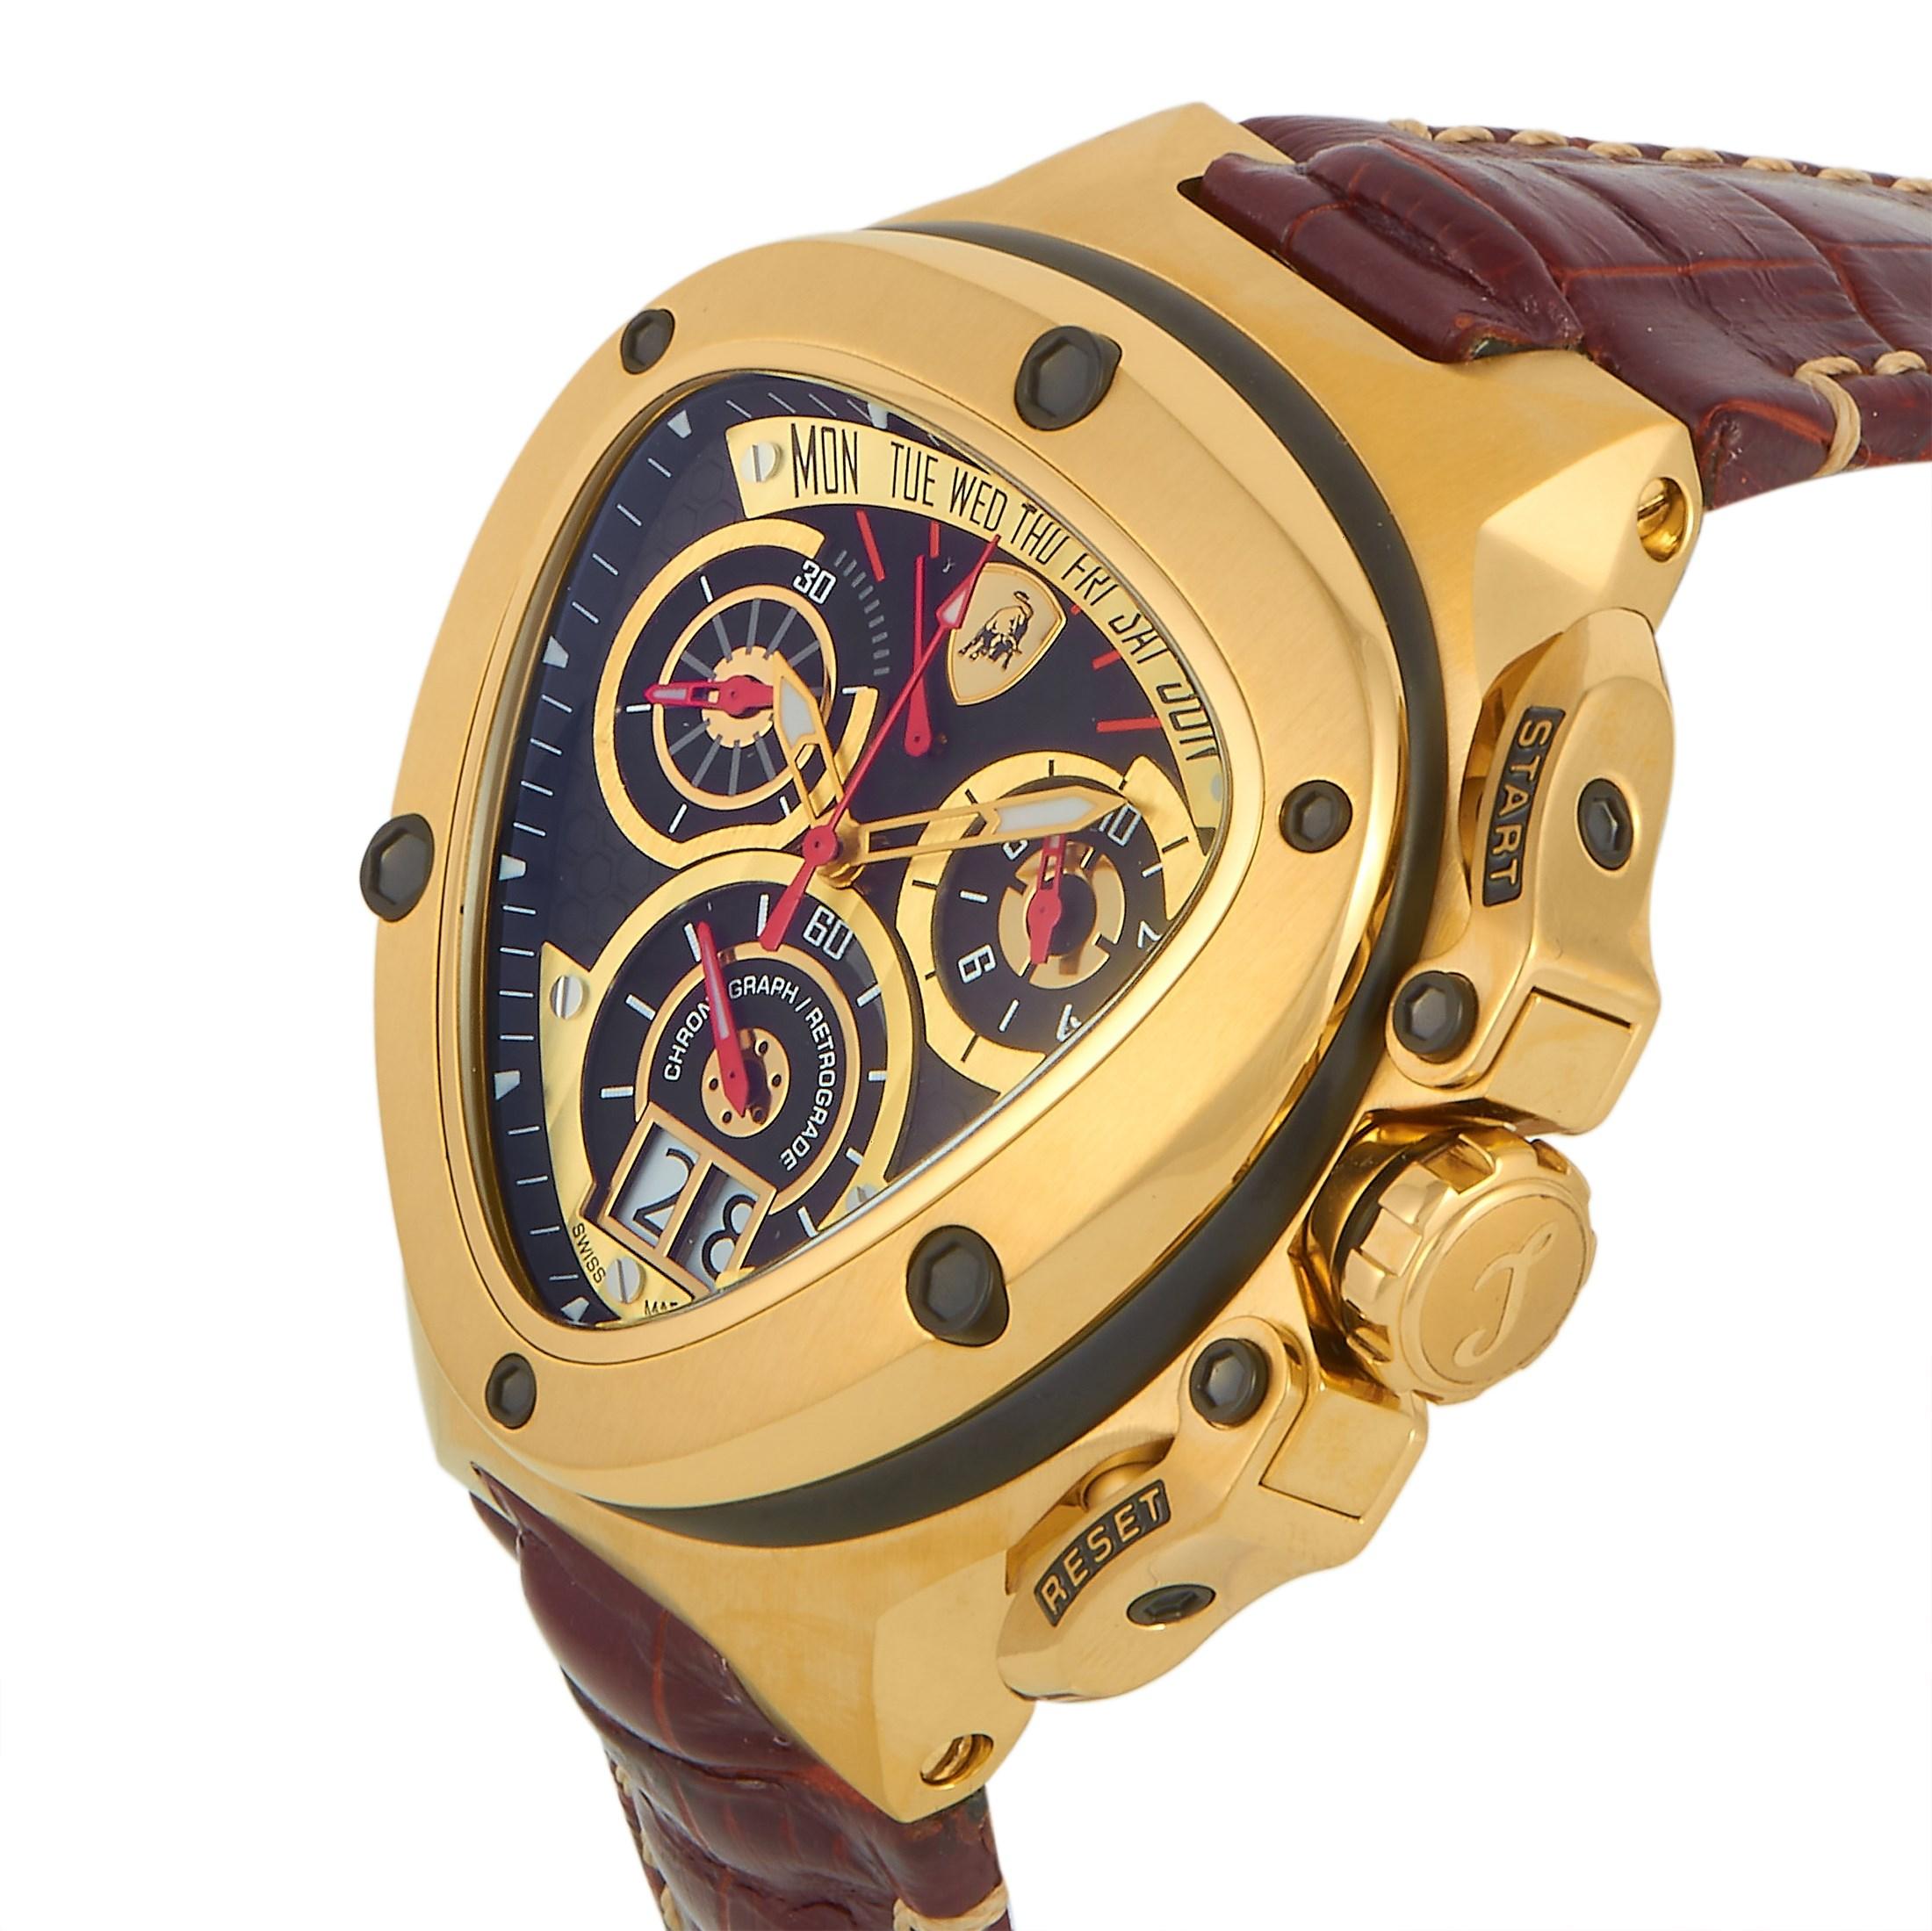 This is the Tonino Lamborghini Spyder Chronograph, reference number SW3011.

The watch boasts a gold-tone stainless steel case that is presented on a brown leather strap, secured on the wrist with a deployment clasp. Powered by the Ronda 8040.N